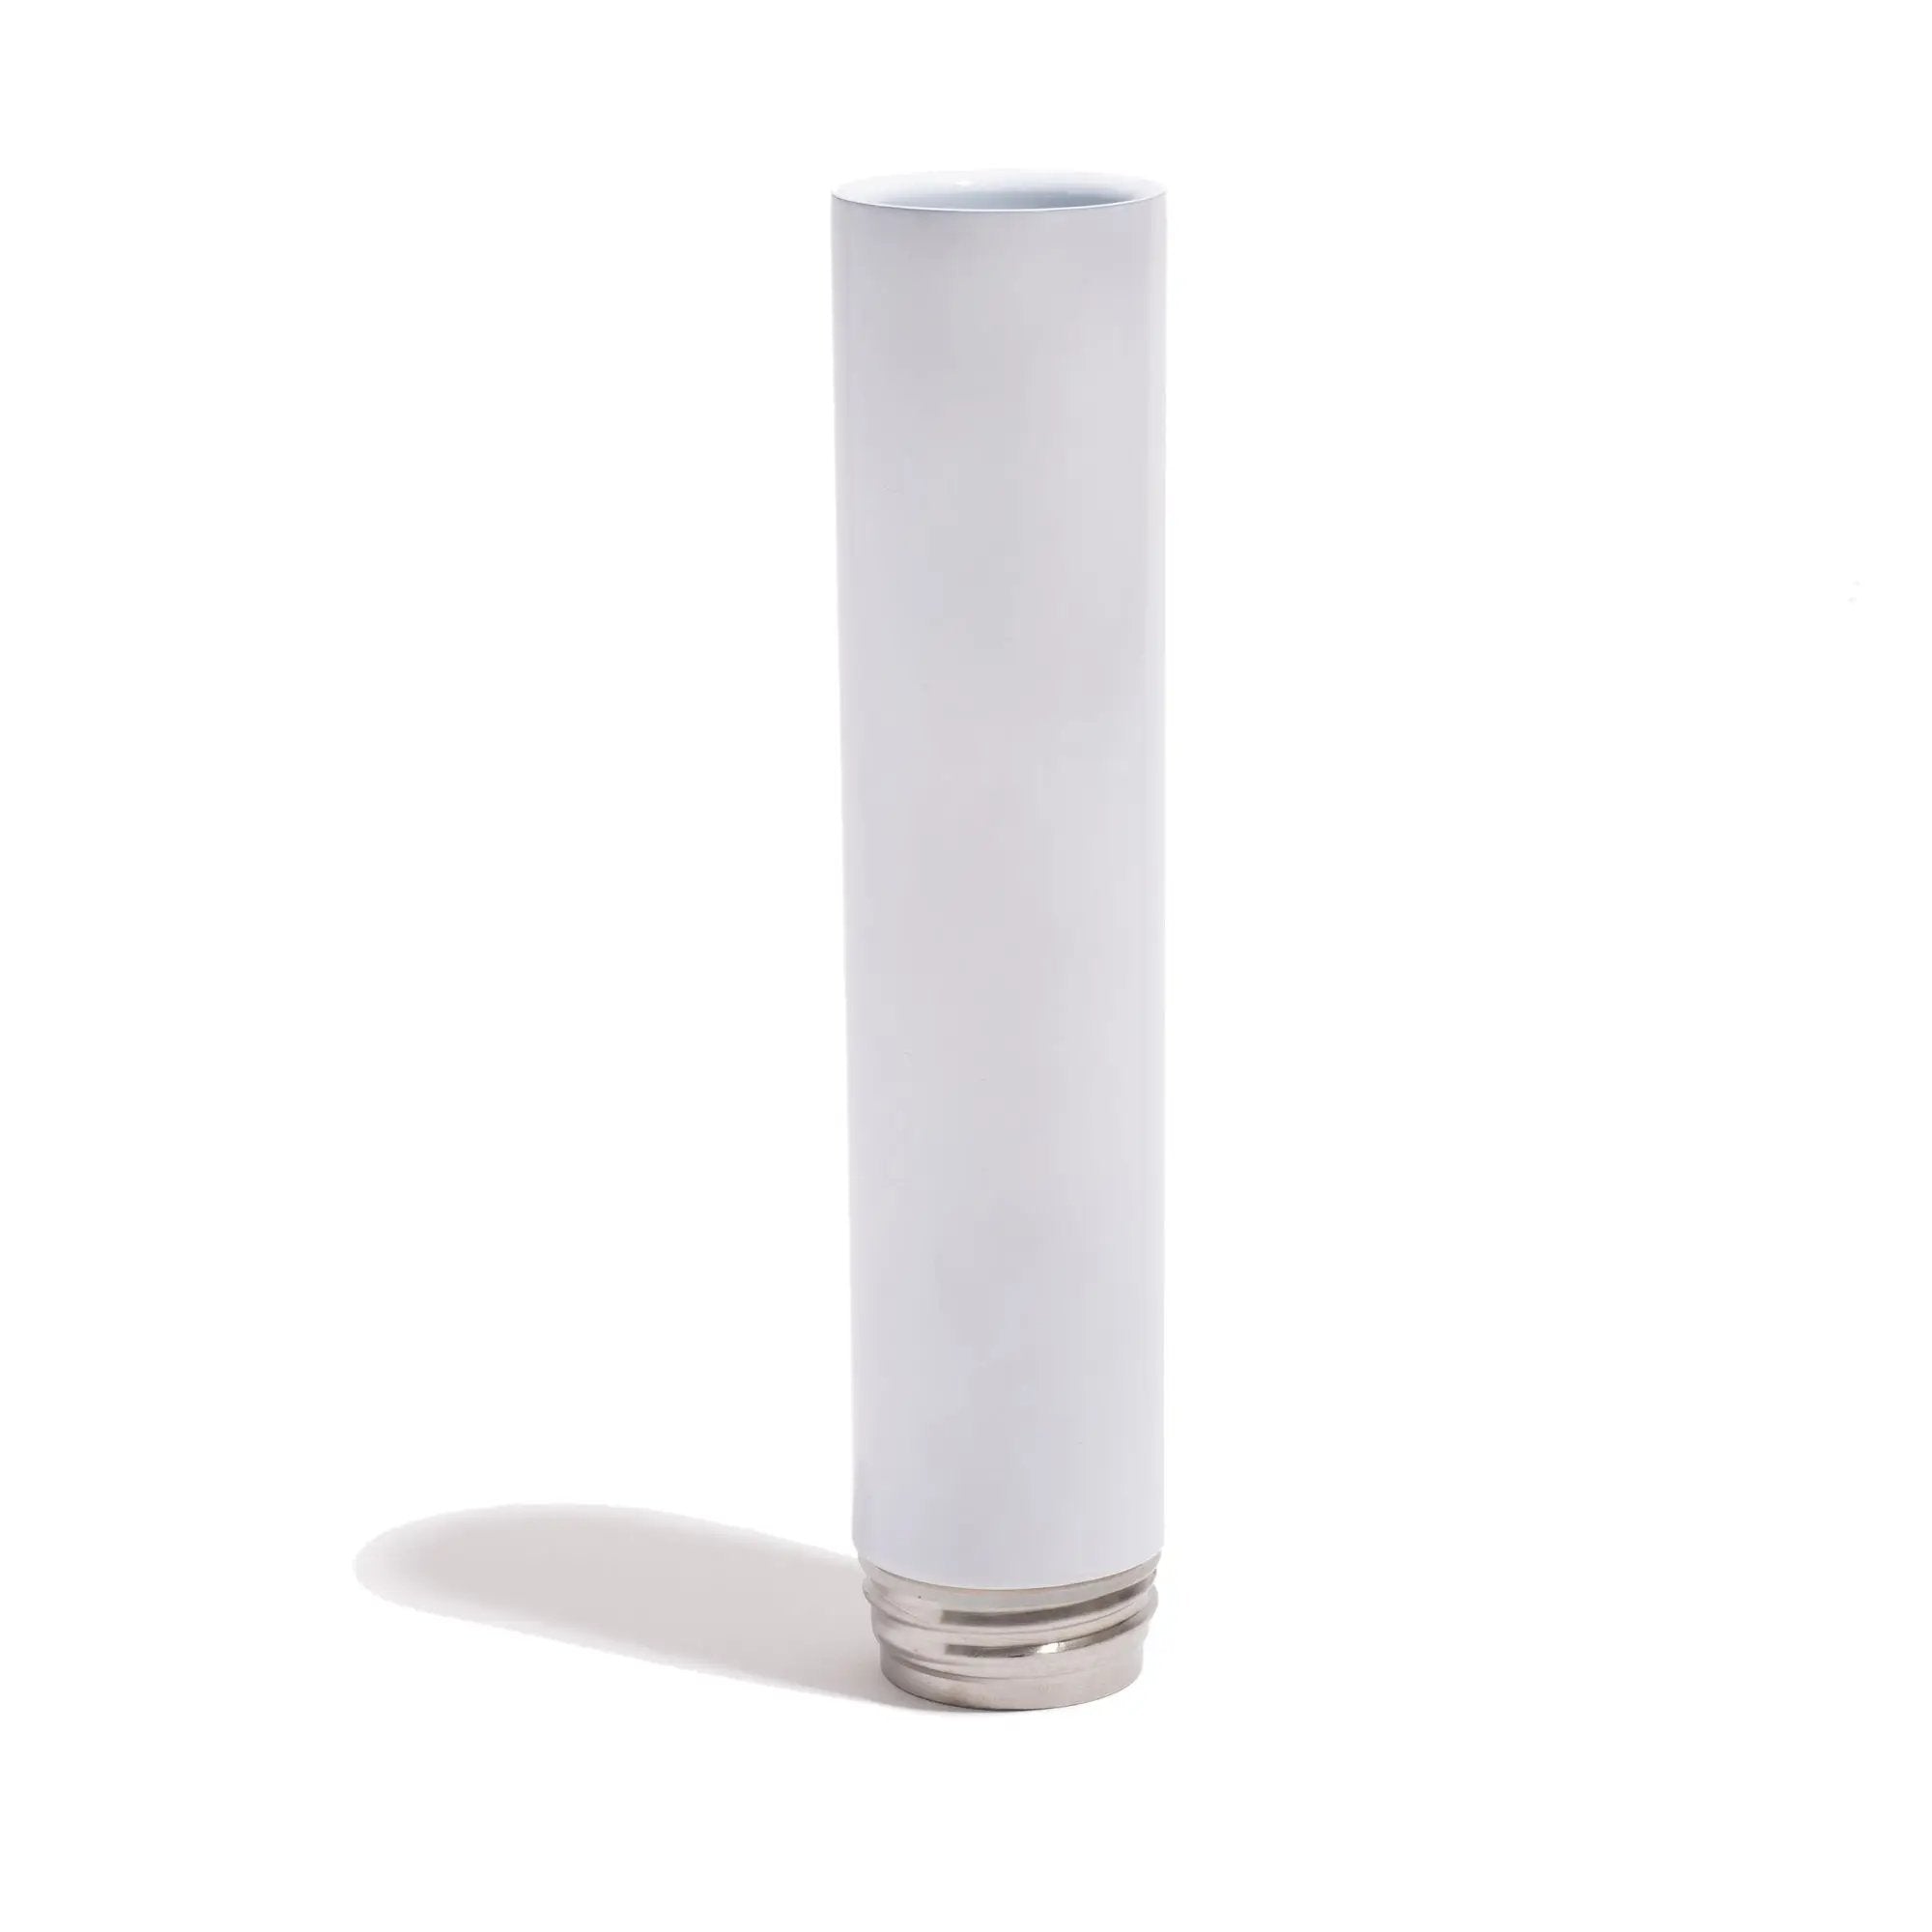 Chill - Mix & Match Series - Gloss White by Chill Steel Pipes